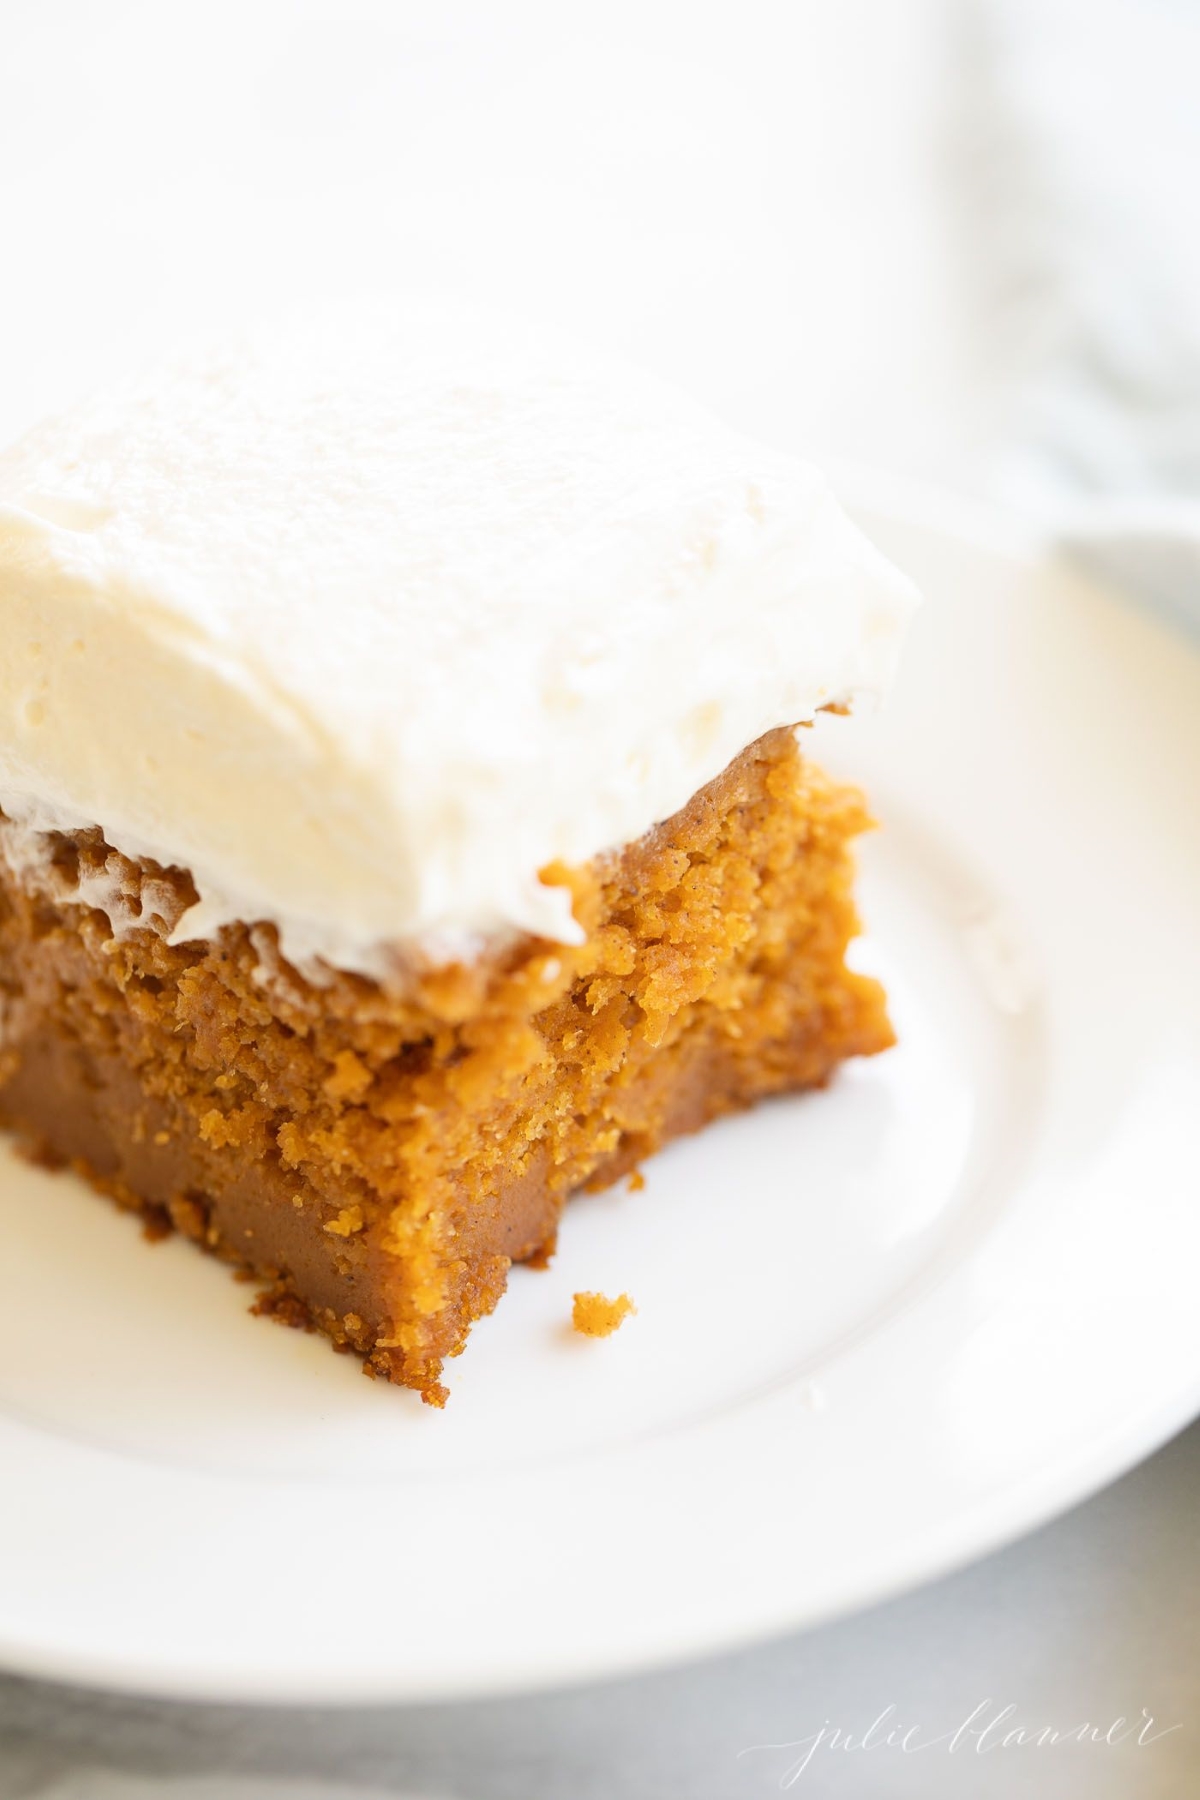 A slice of pumpkin cake with a thick layer of cream cheese frosting on a white plate.